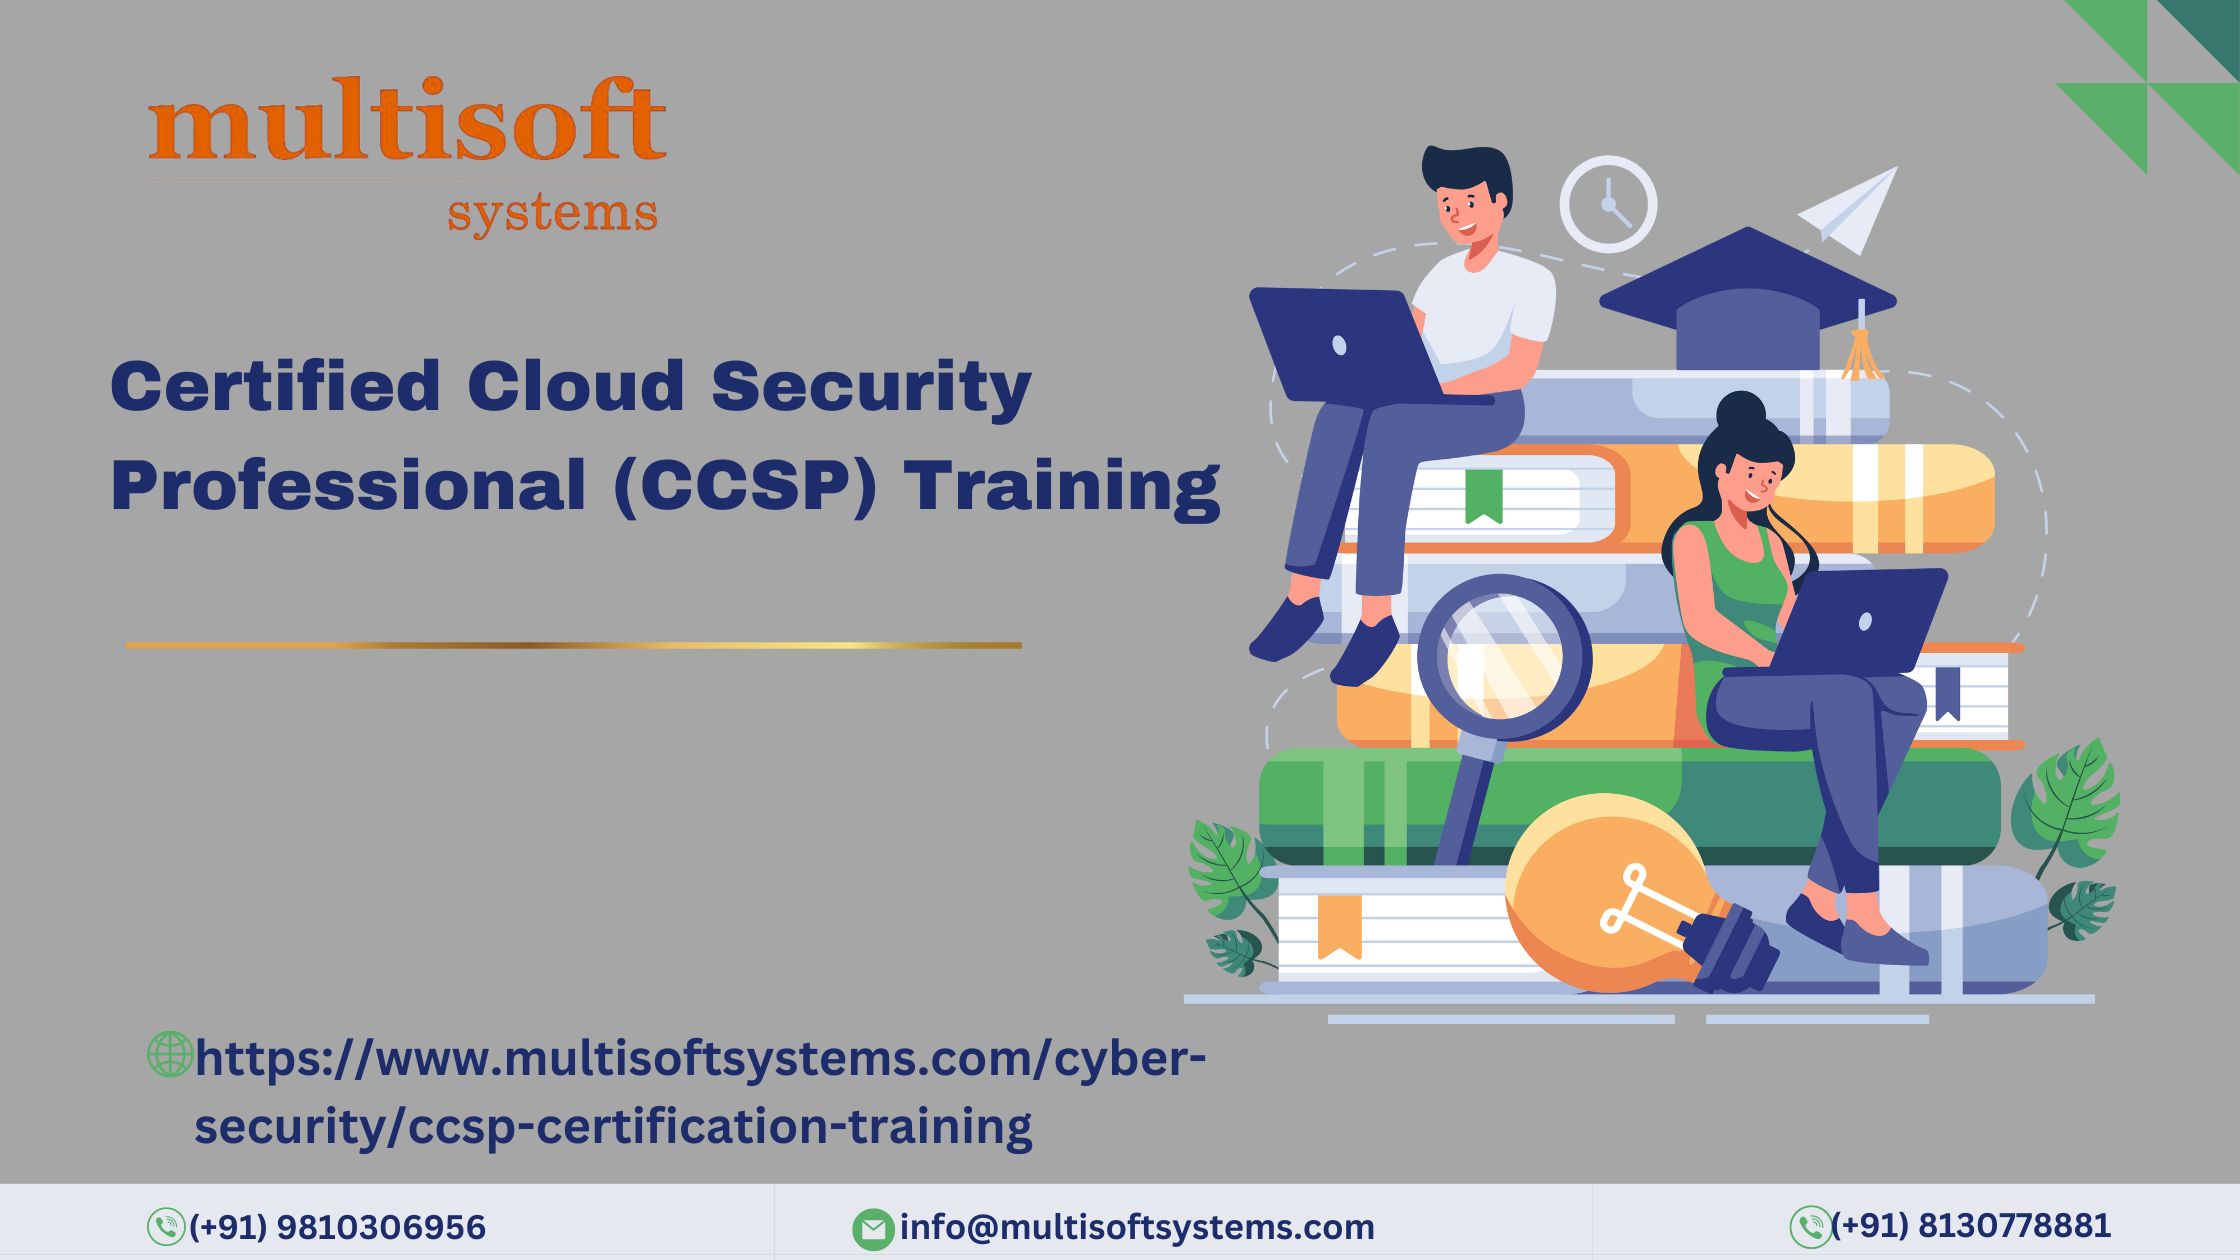 MS - Certified Cloud Security Professional (CCSP) Training